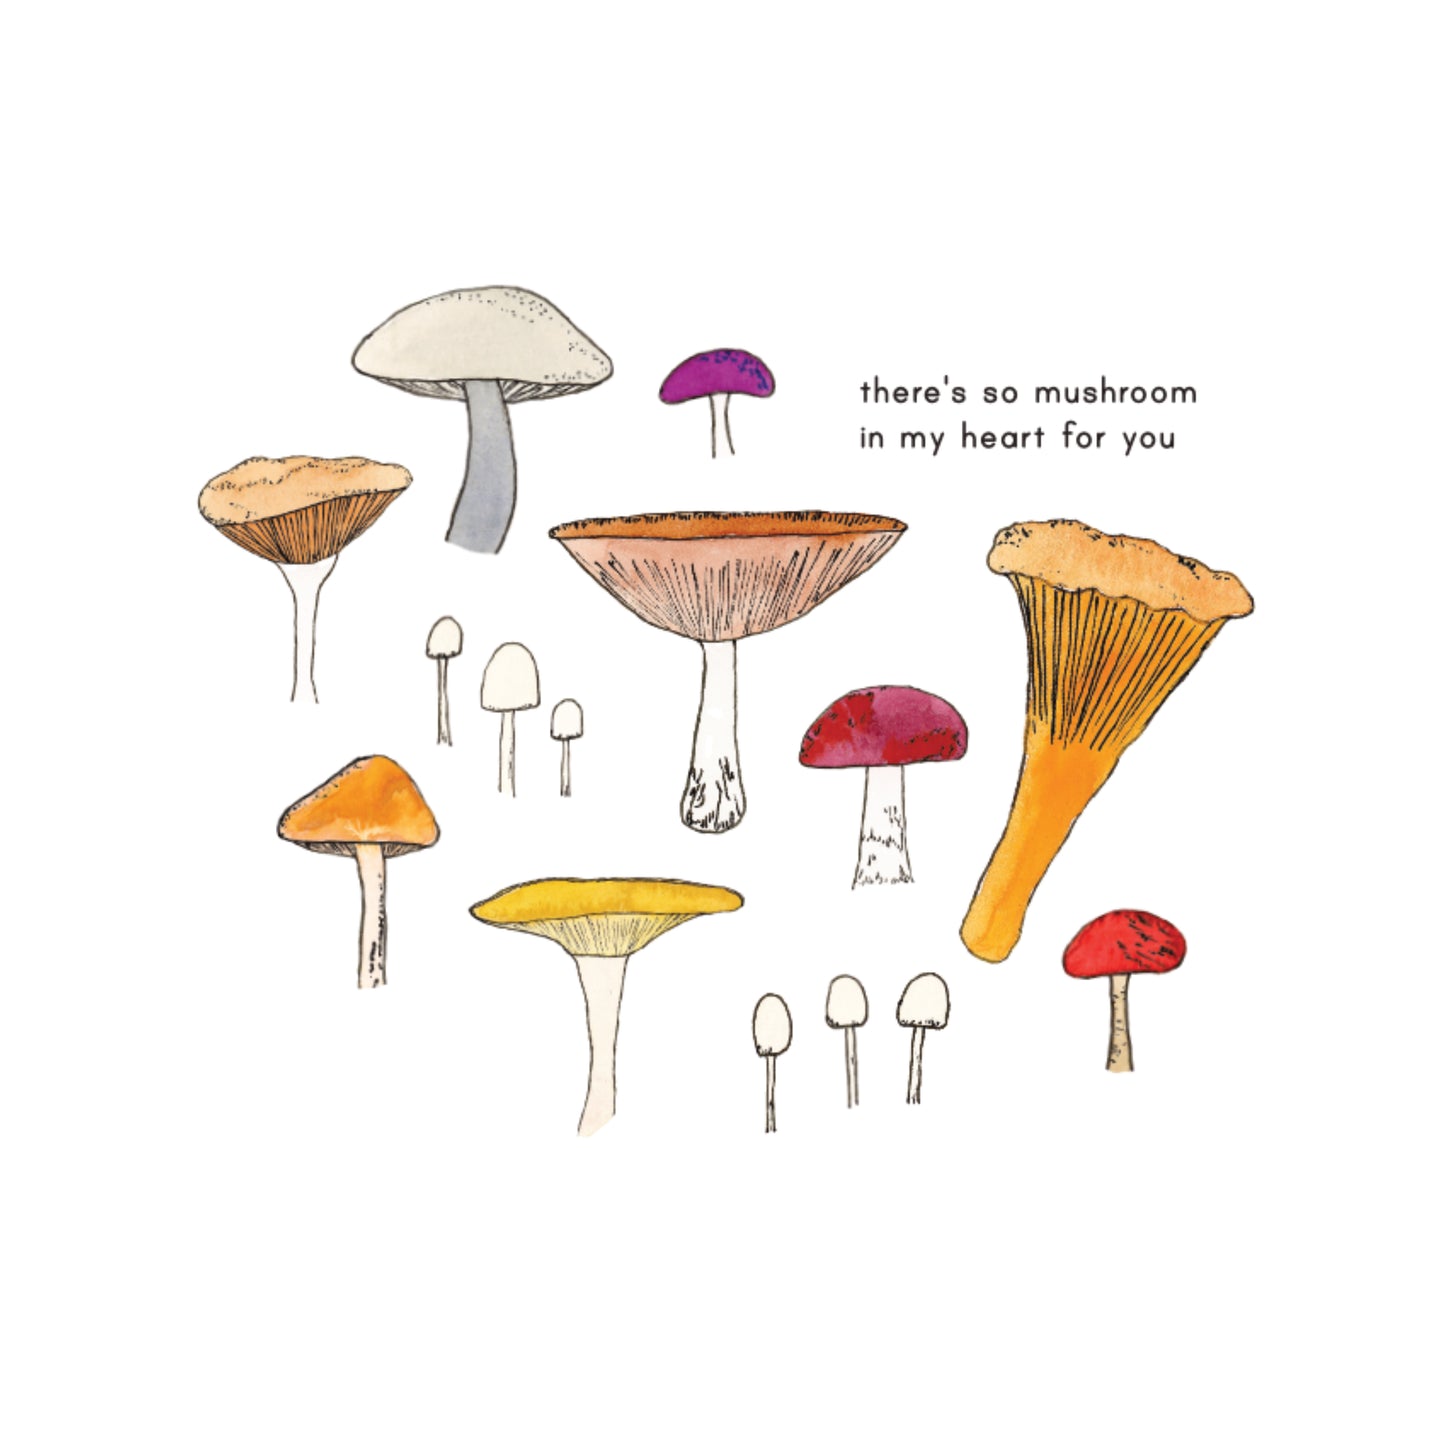 Mushroom Card - "There's So Mushroom in My Heart for You"